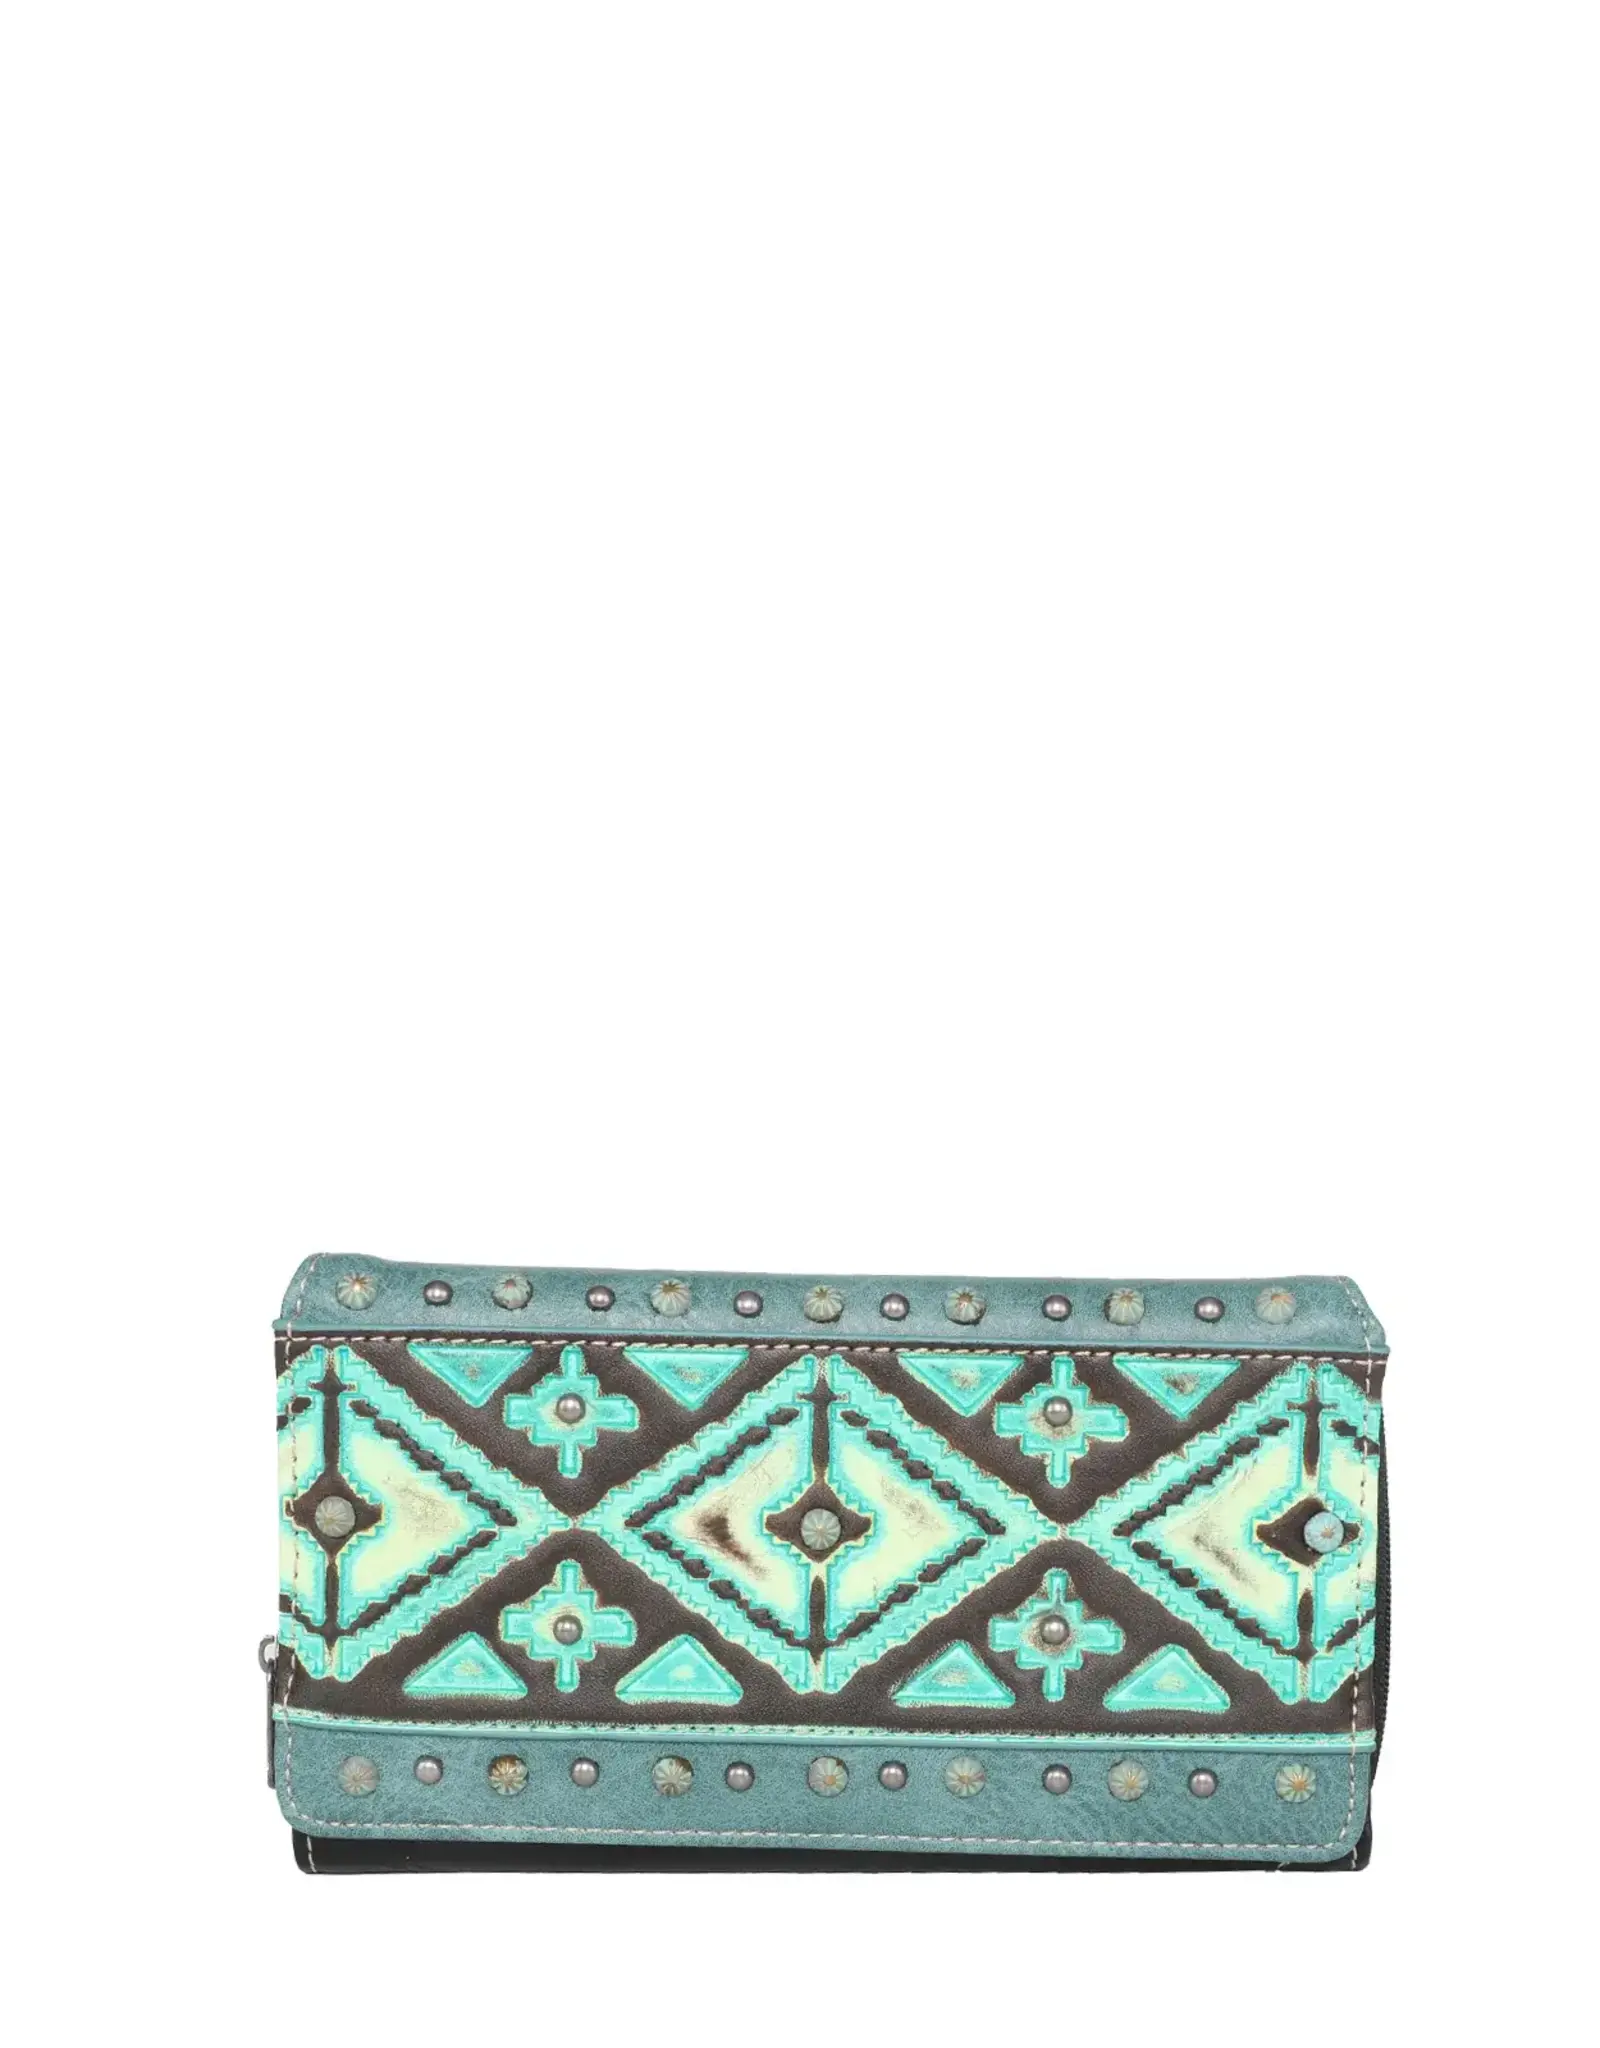 WALLET AZTEC TOOLED LEATHER TURQ W/ CONCHOS